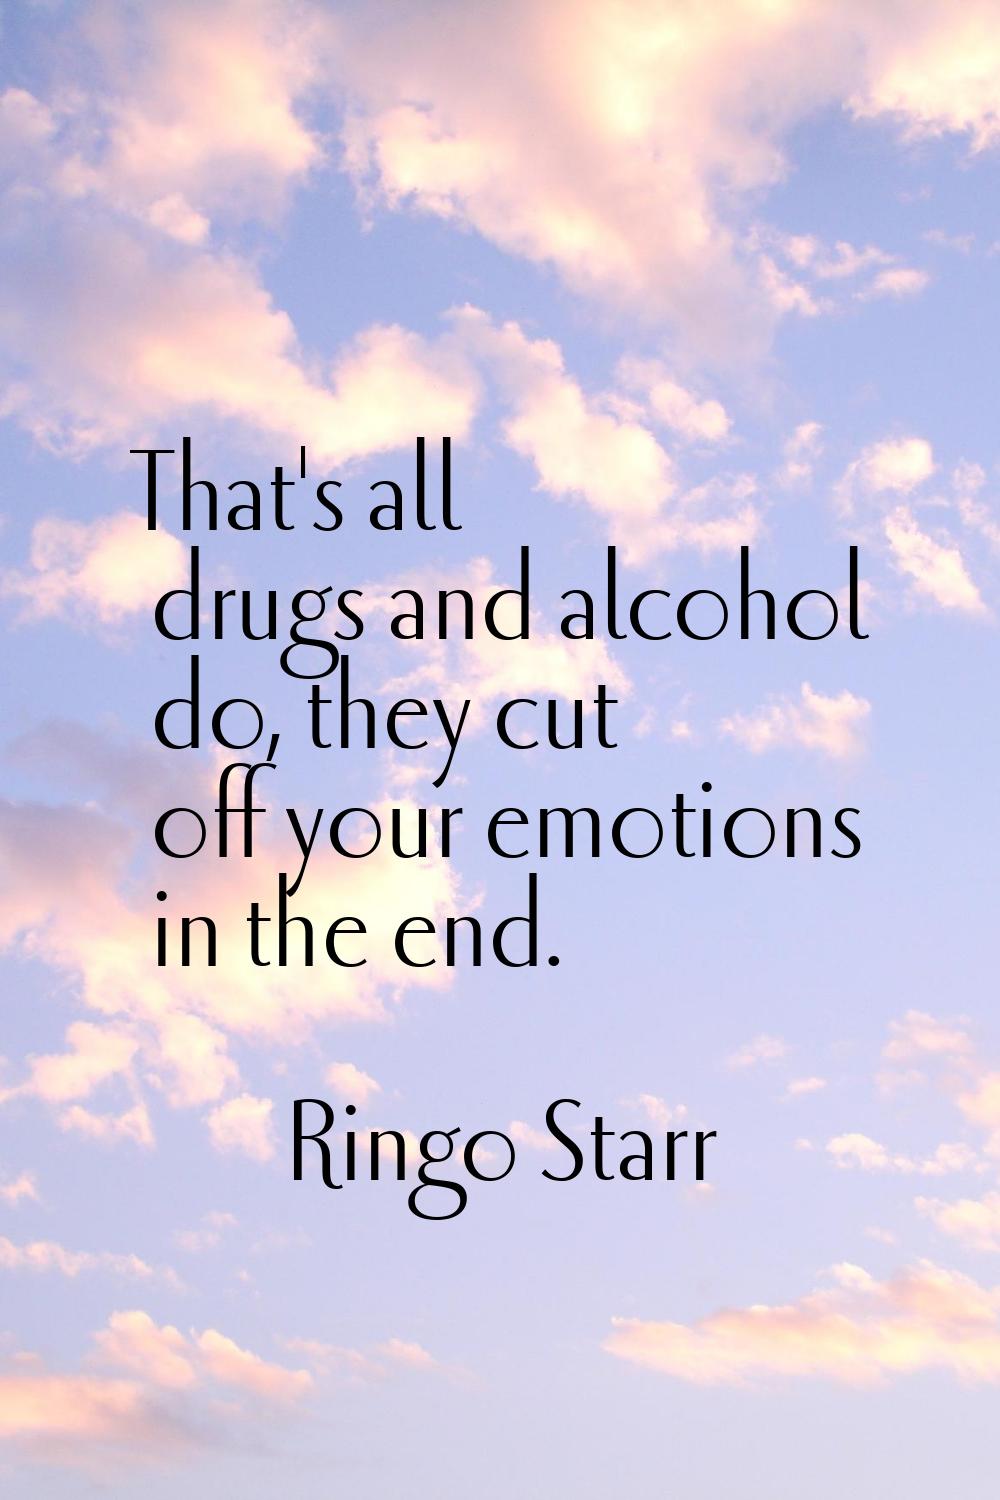 That's all drugs and alcohol do, they cut off your emotions in the end.